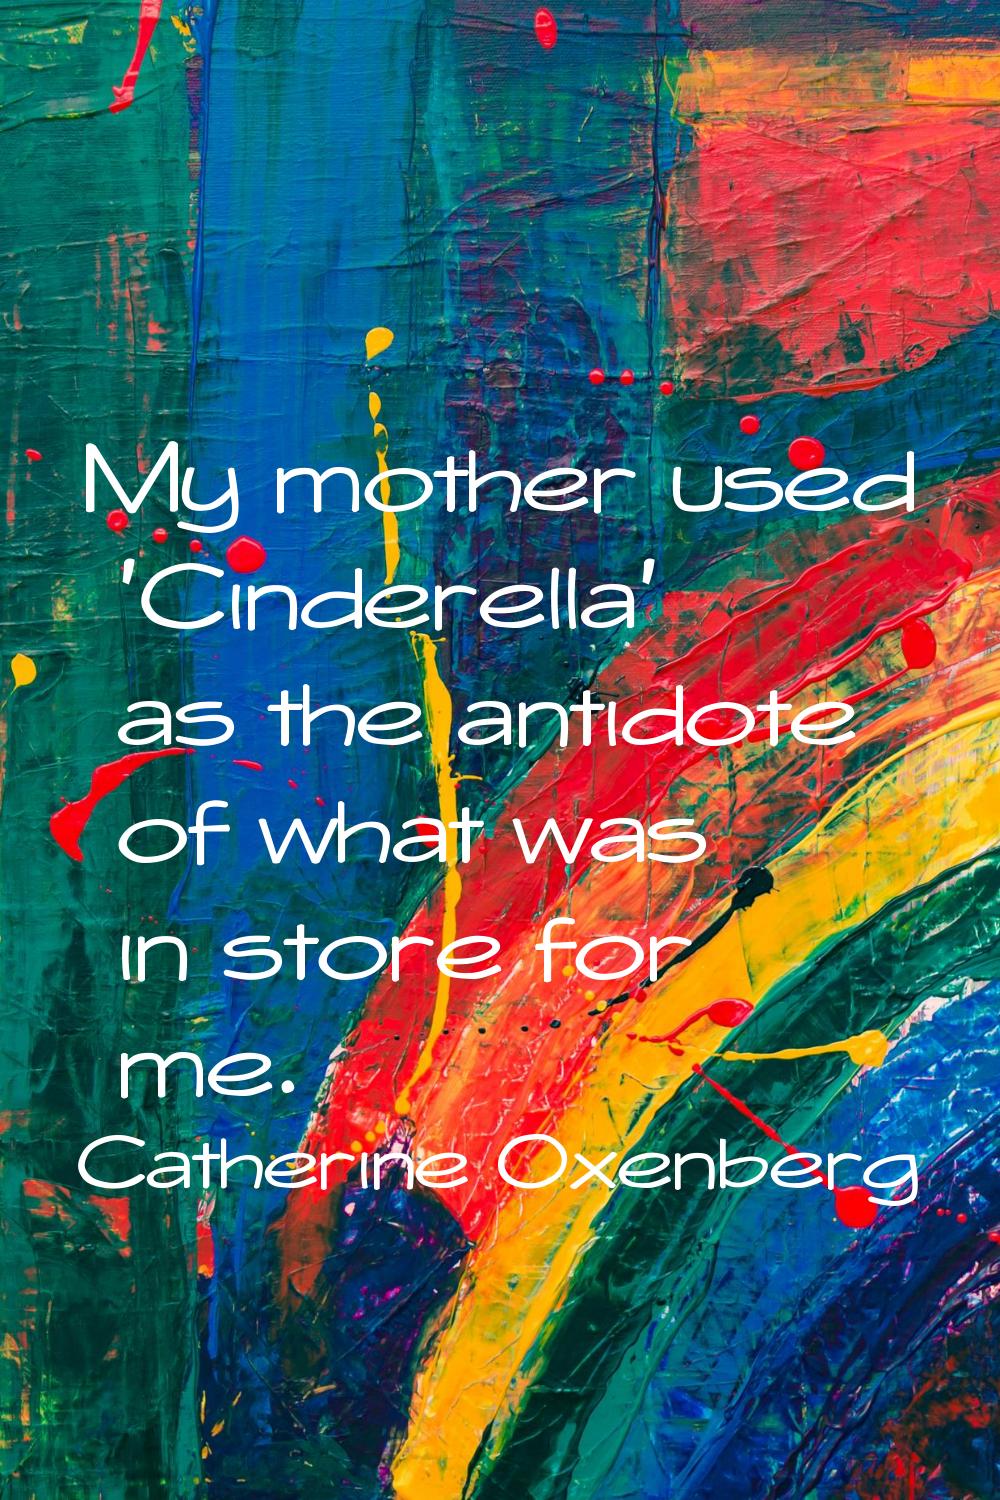 My mother used 'Cinderella' as the antidote of what was in store for me.